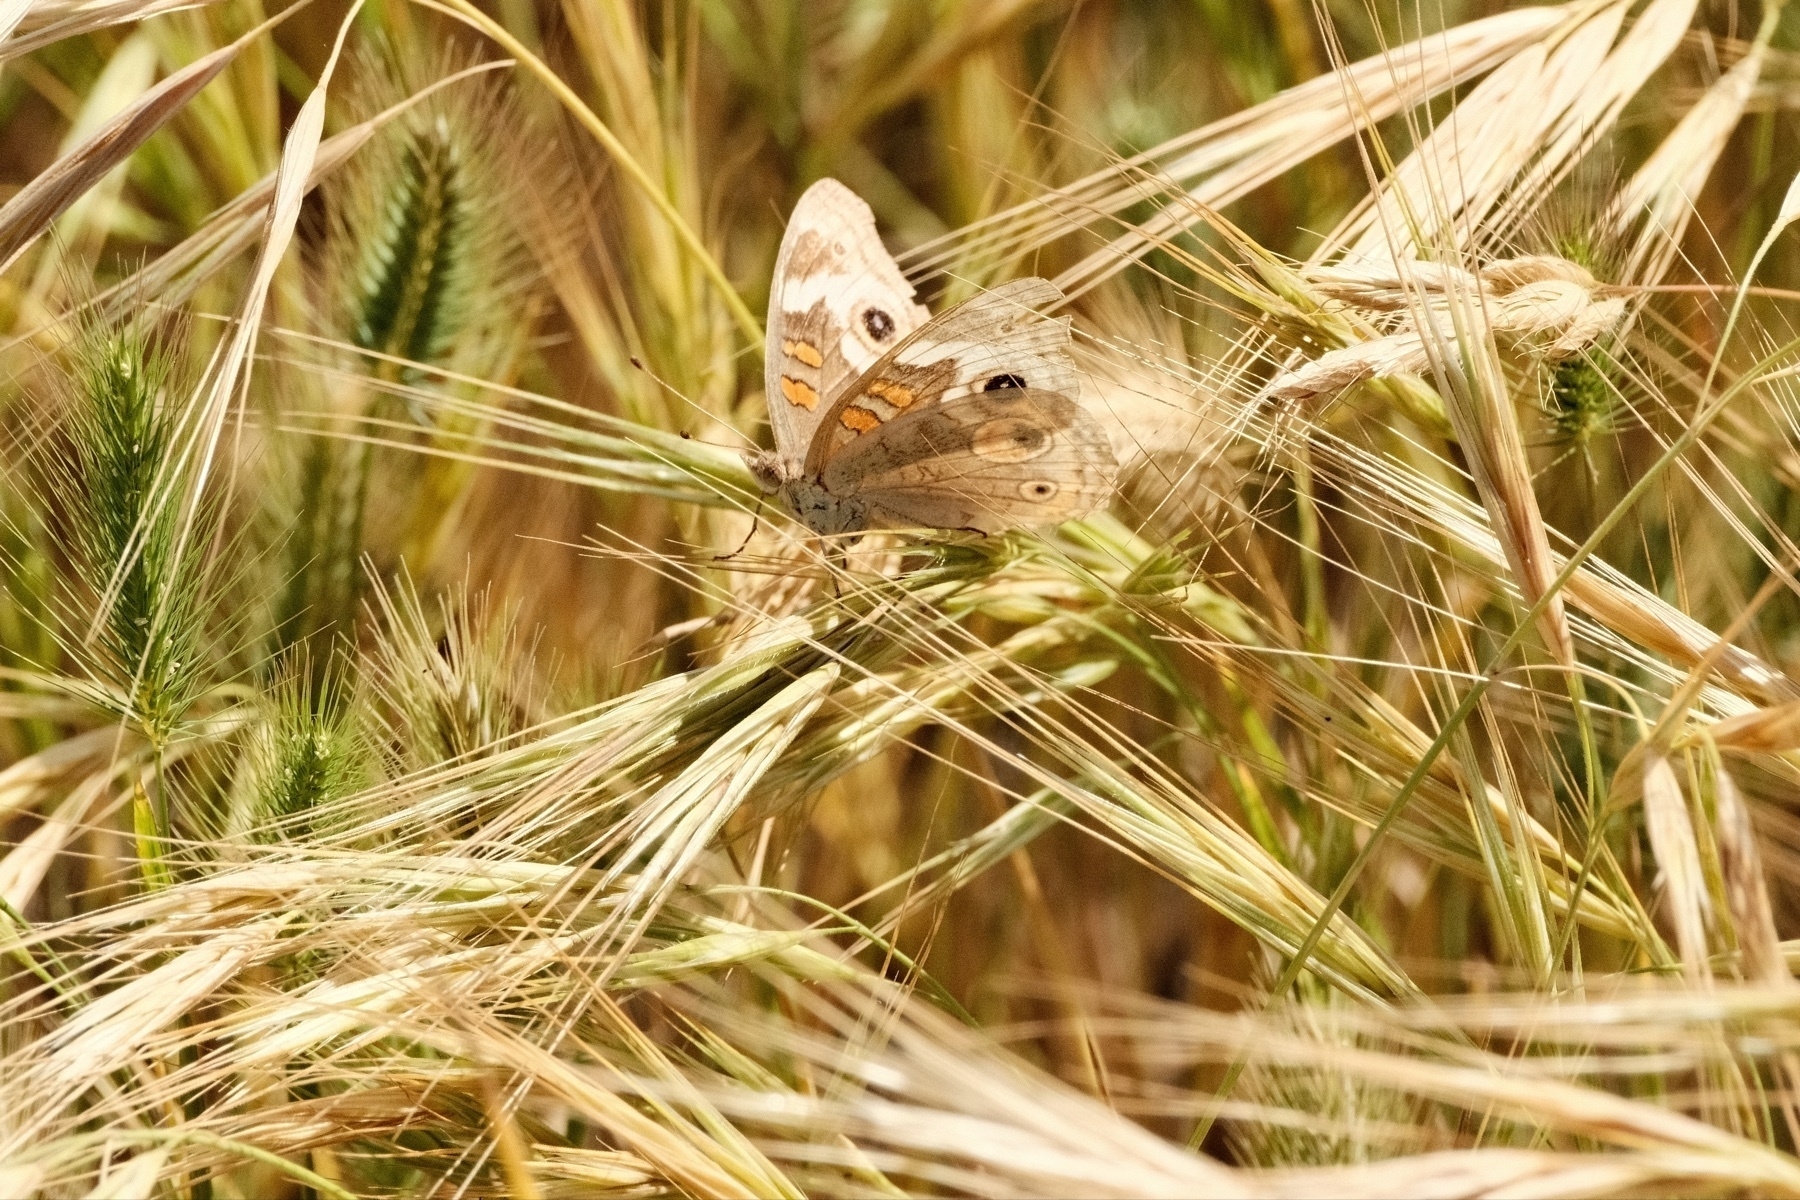 A brown butterfly with patches of orange and black eyes near the top edge of its wings. The butterfly is surrounded by green to brown grass.